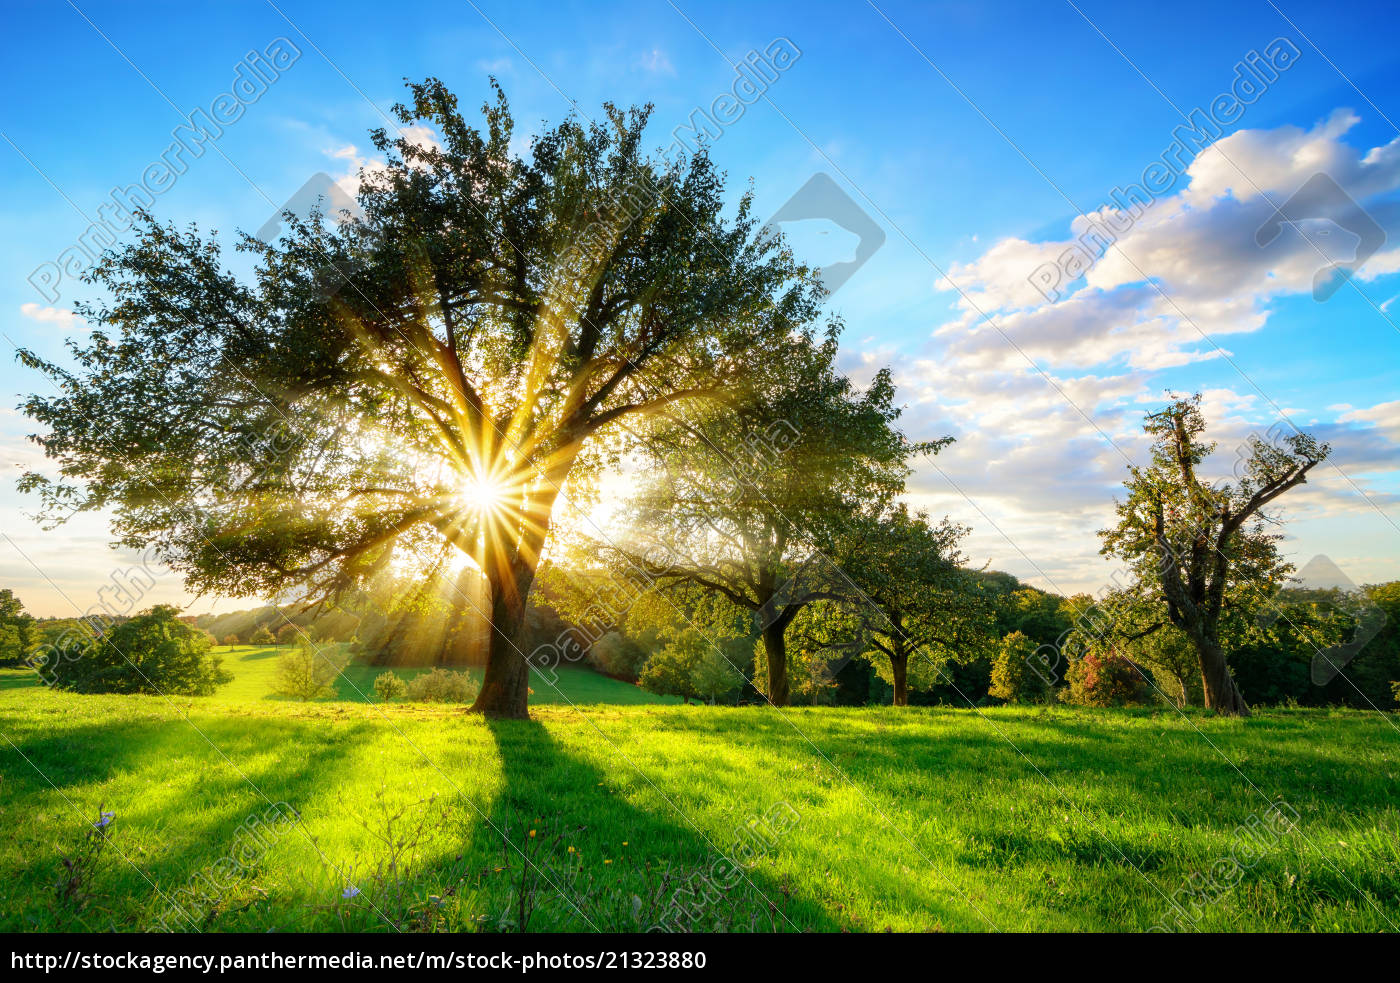 sun is shining through a tree in a rural landscape - Royalty free ...